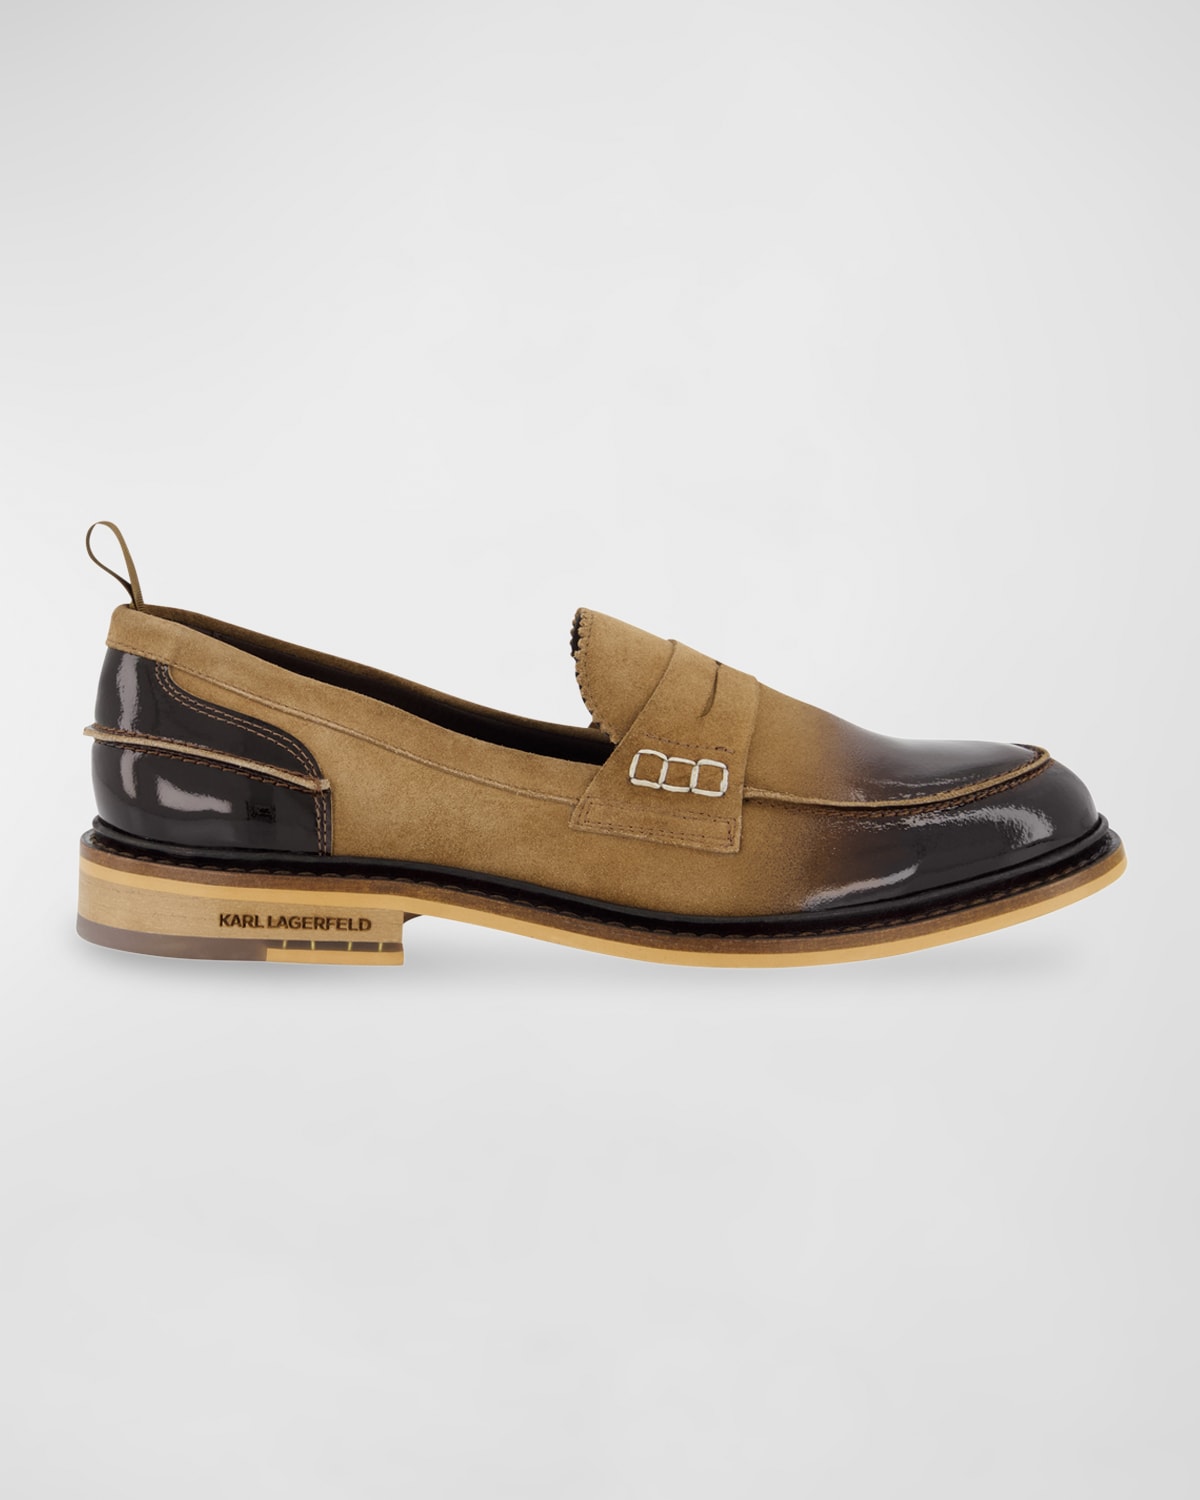 Karl Lagerfeld Men's Suede And Patent Leather Penny Loafers In Brown